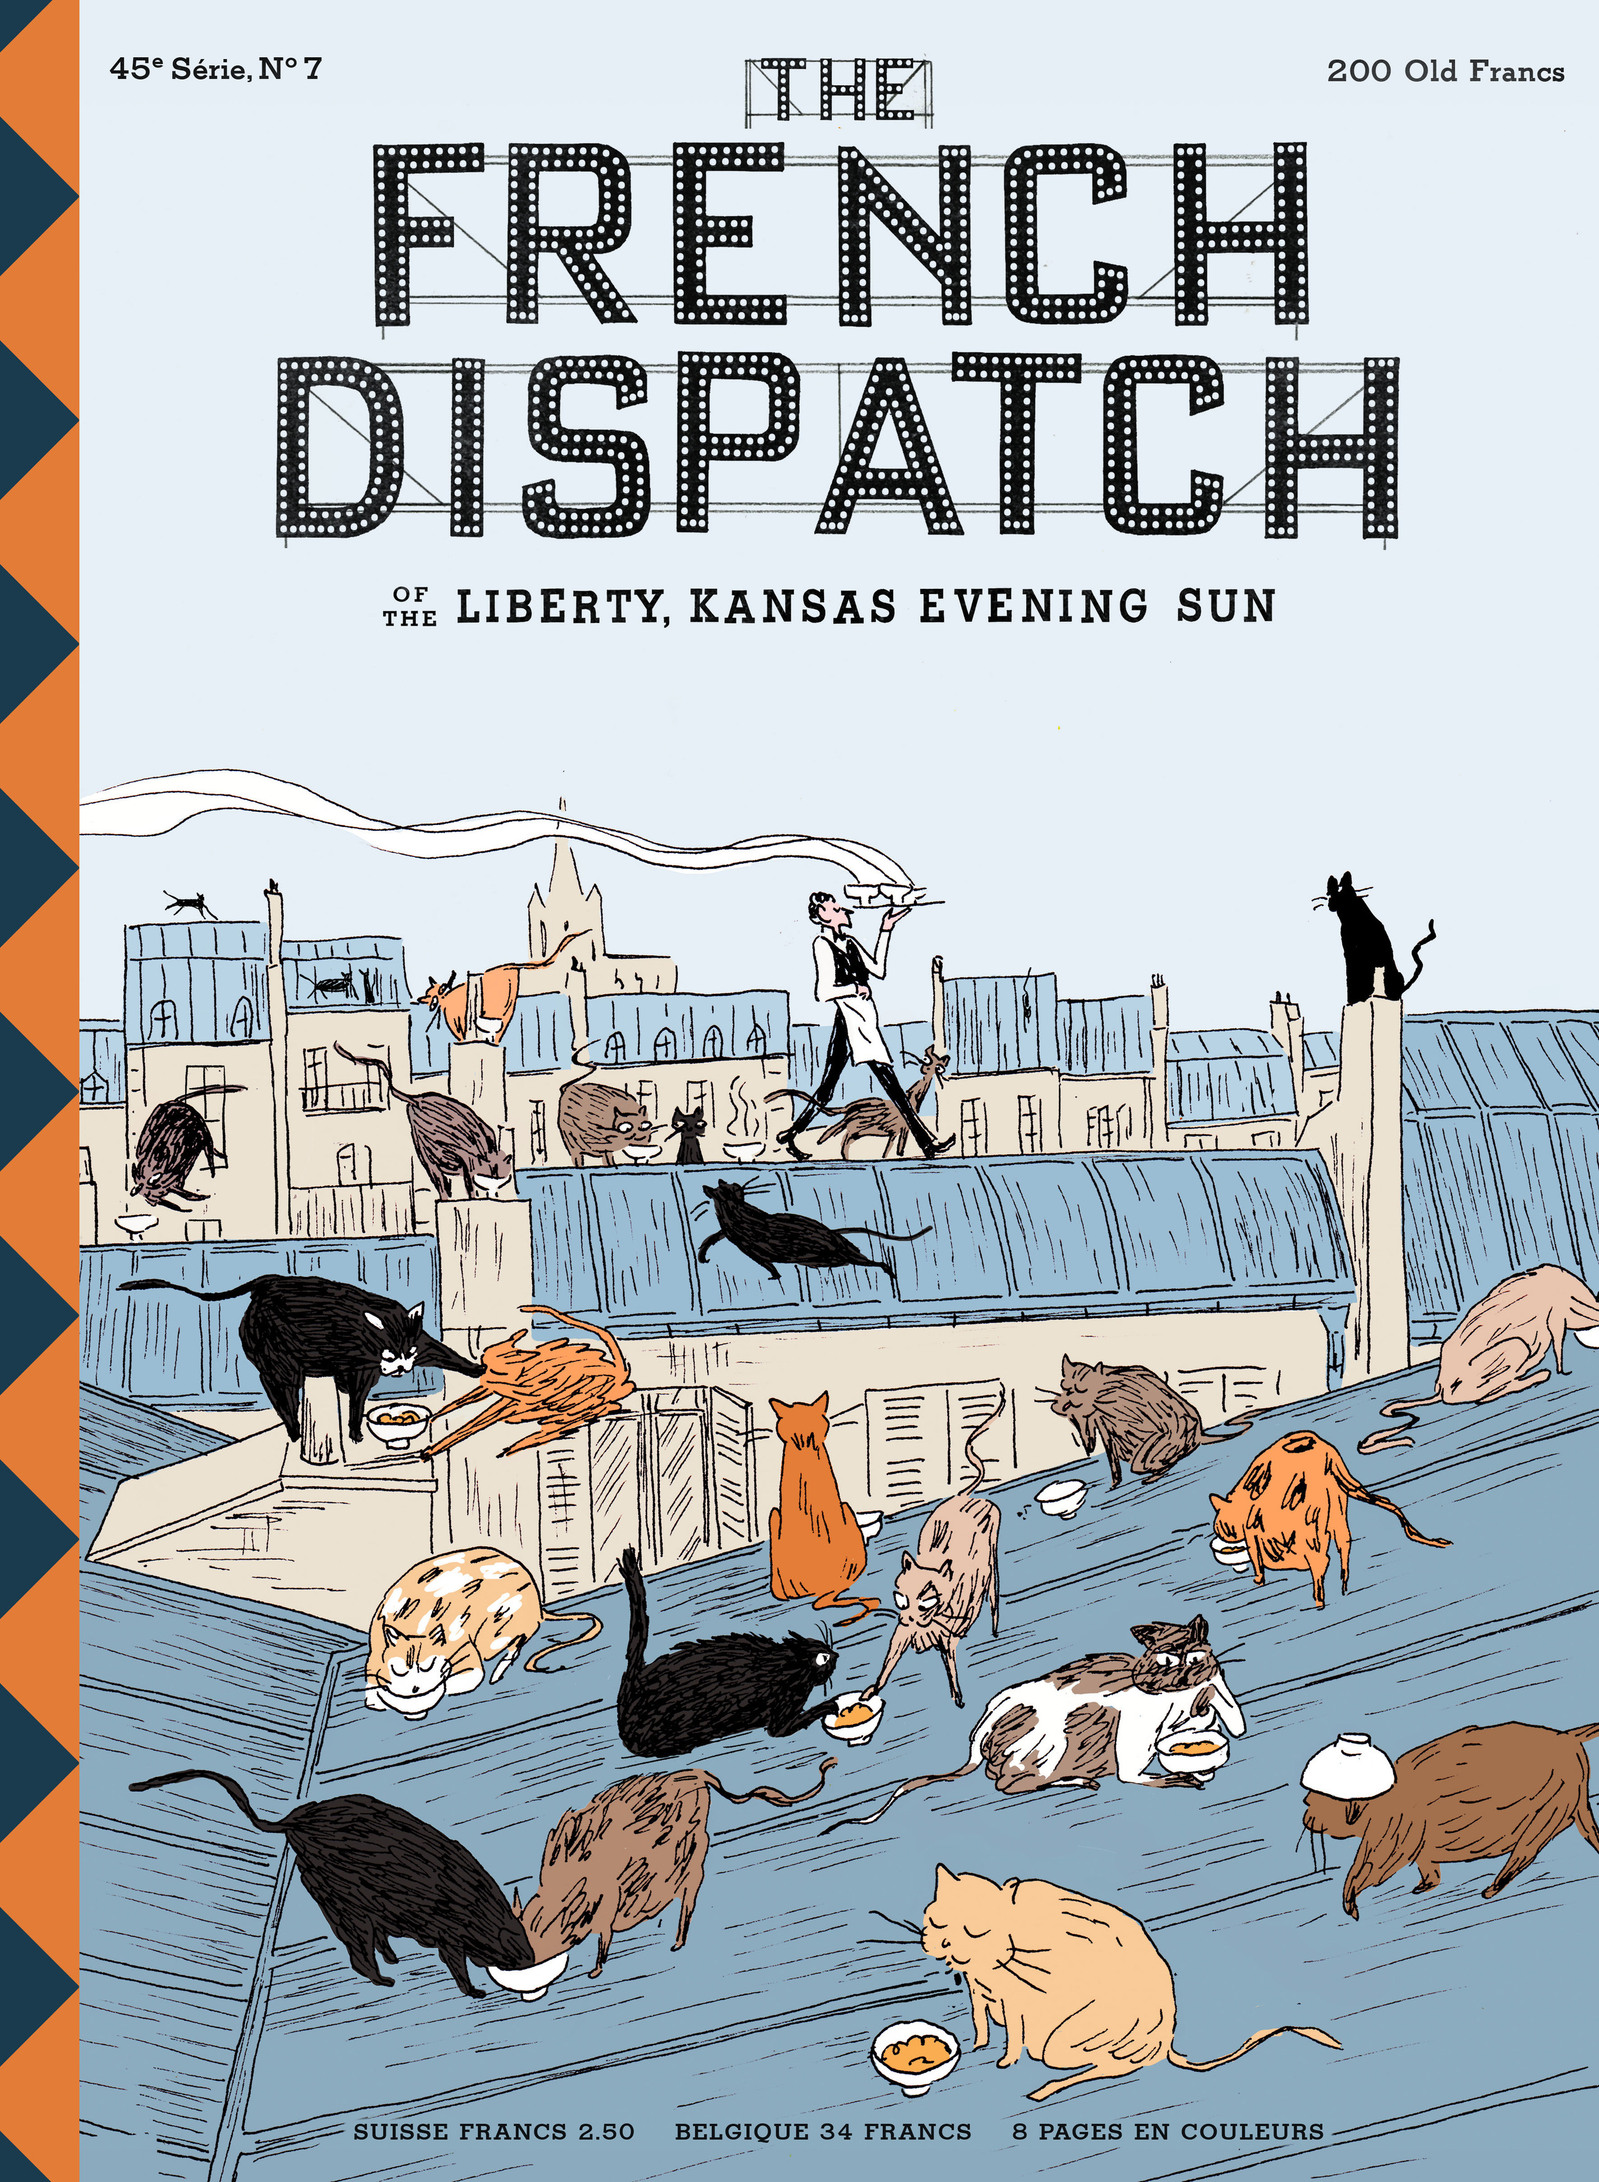 Javi Aznarez - Magazine covers in The French Dispatch

Commissioned work for the film The French Dispatch directed by Wes Anderson
© Searchlight Pictures